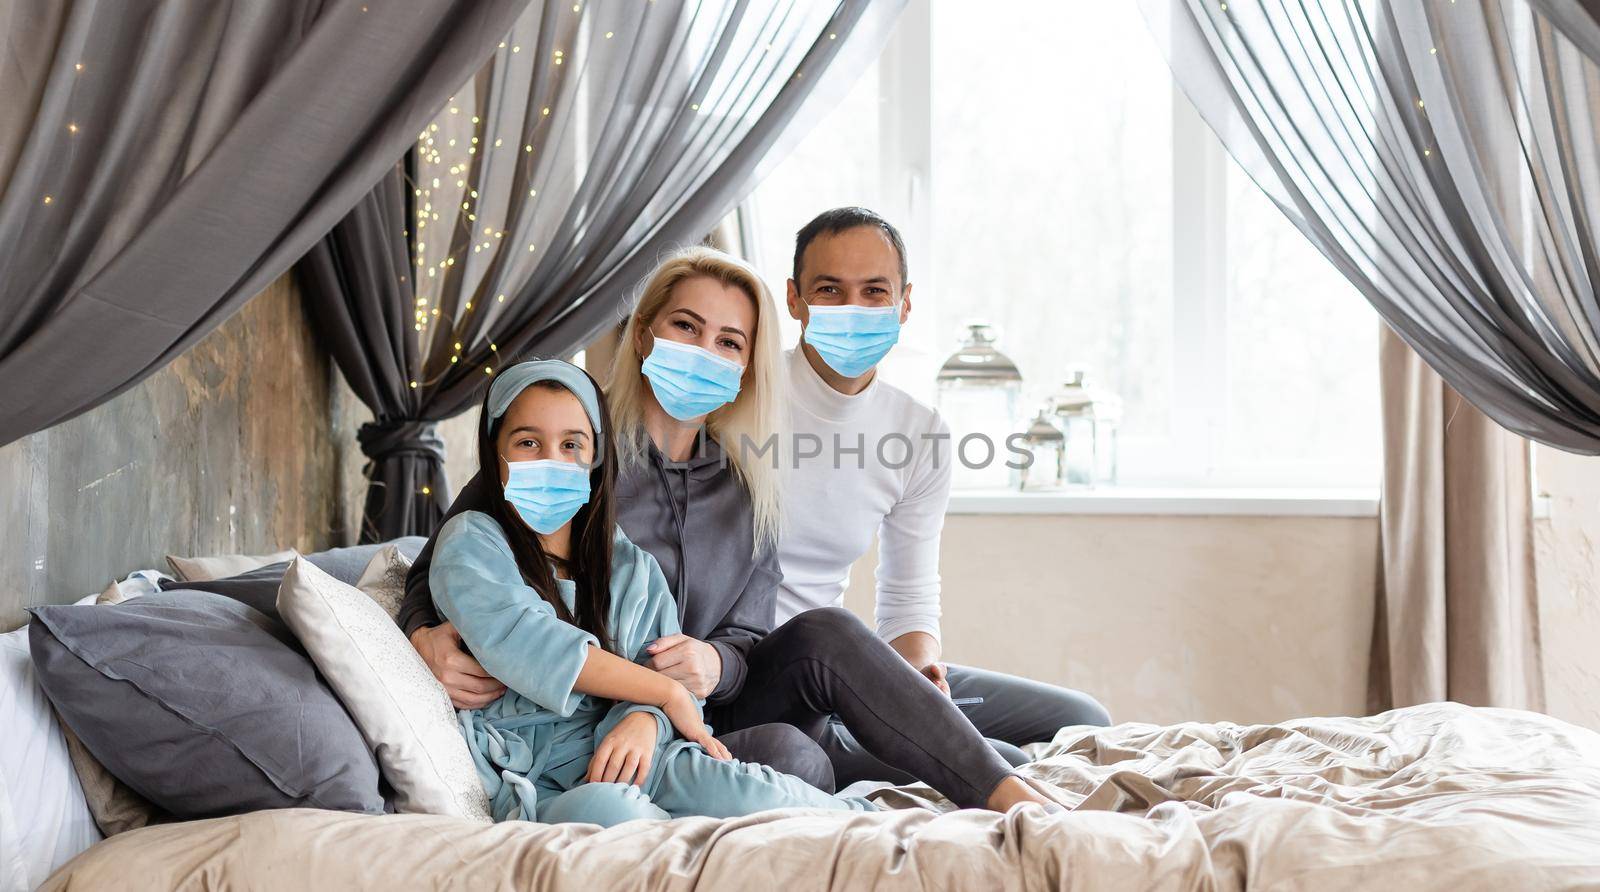 Affectionate young mother embracing little kid daughter, family wearing medical face mask, give support, comforting, expressing love. Concept of coronavirus or COVID-19 pandemic disease symptoms by Andelov13